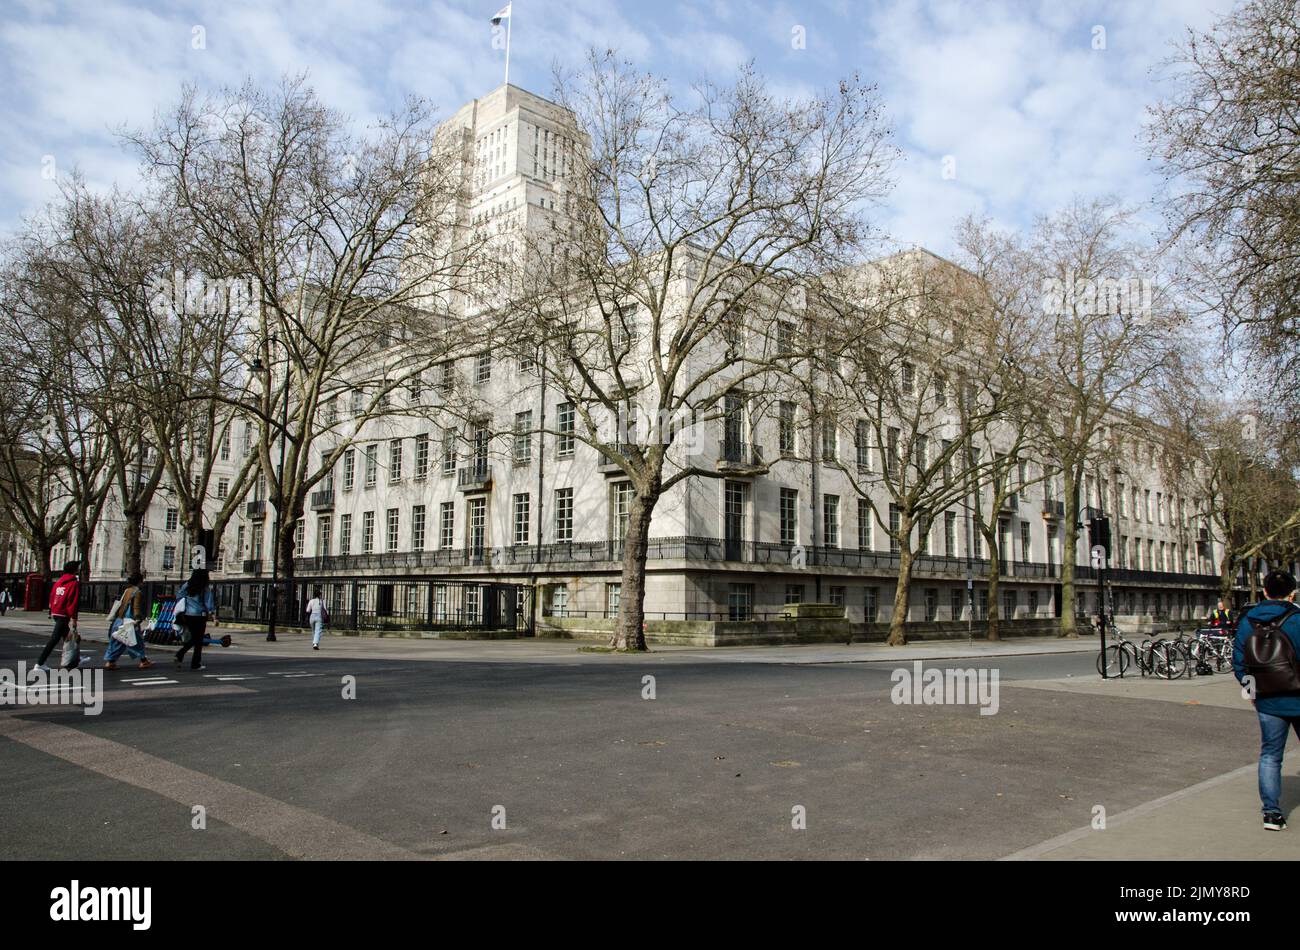 London, UK - March 21, 2022: View from Montague Place looking towards the imposing headquarters of the University of London  - Senate House in Bloomsb Stock Photo